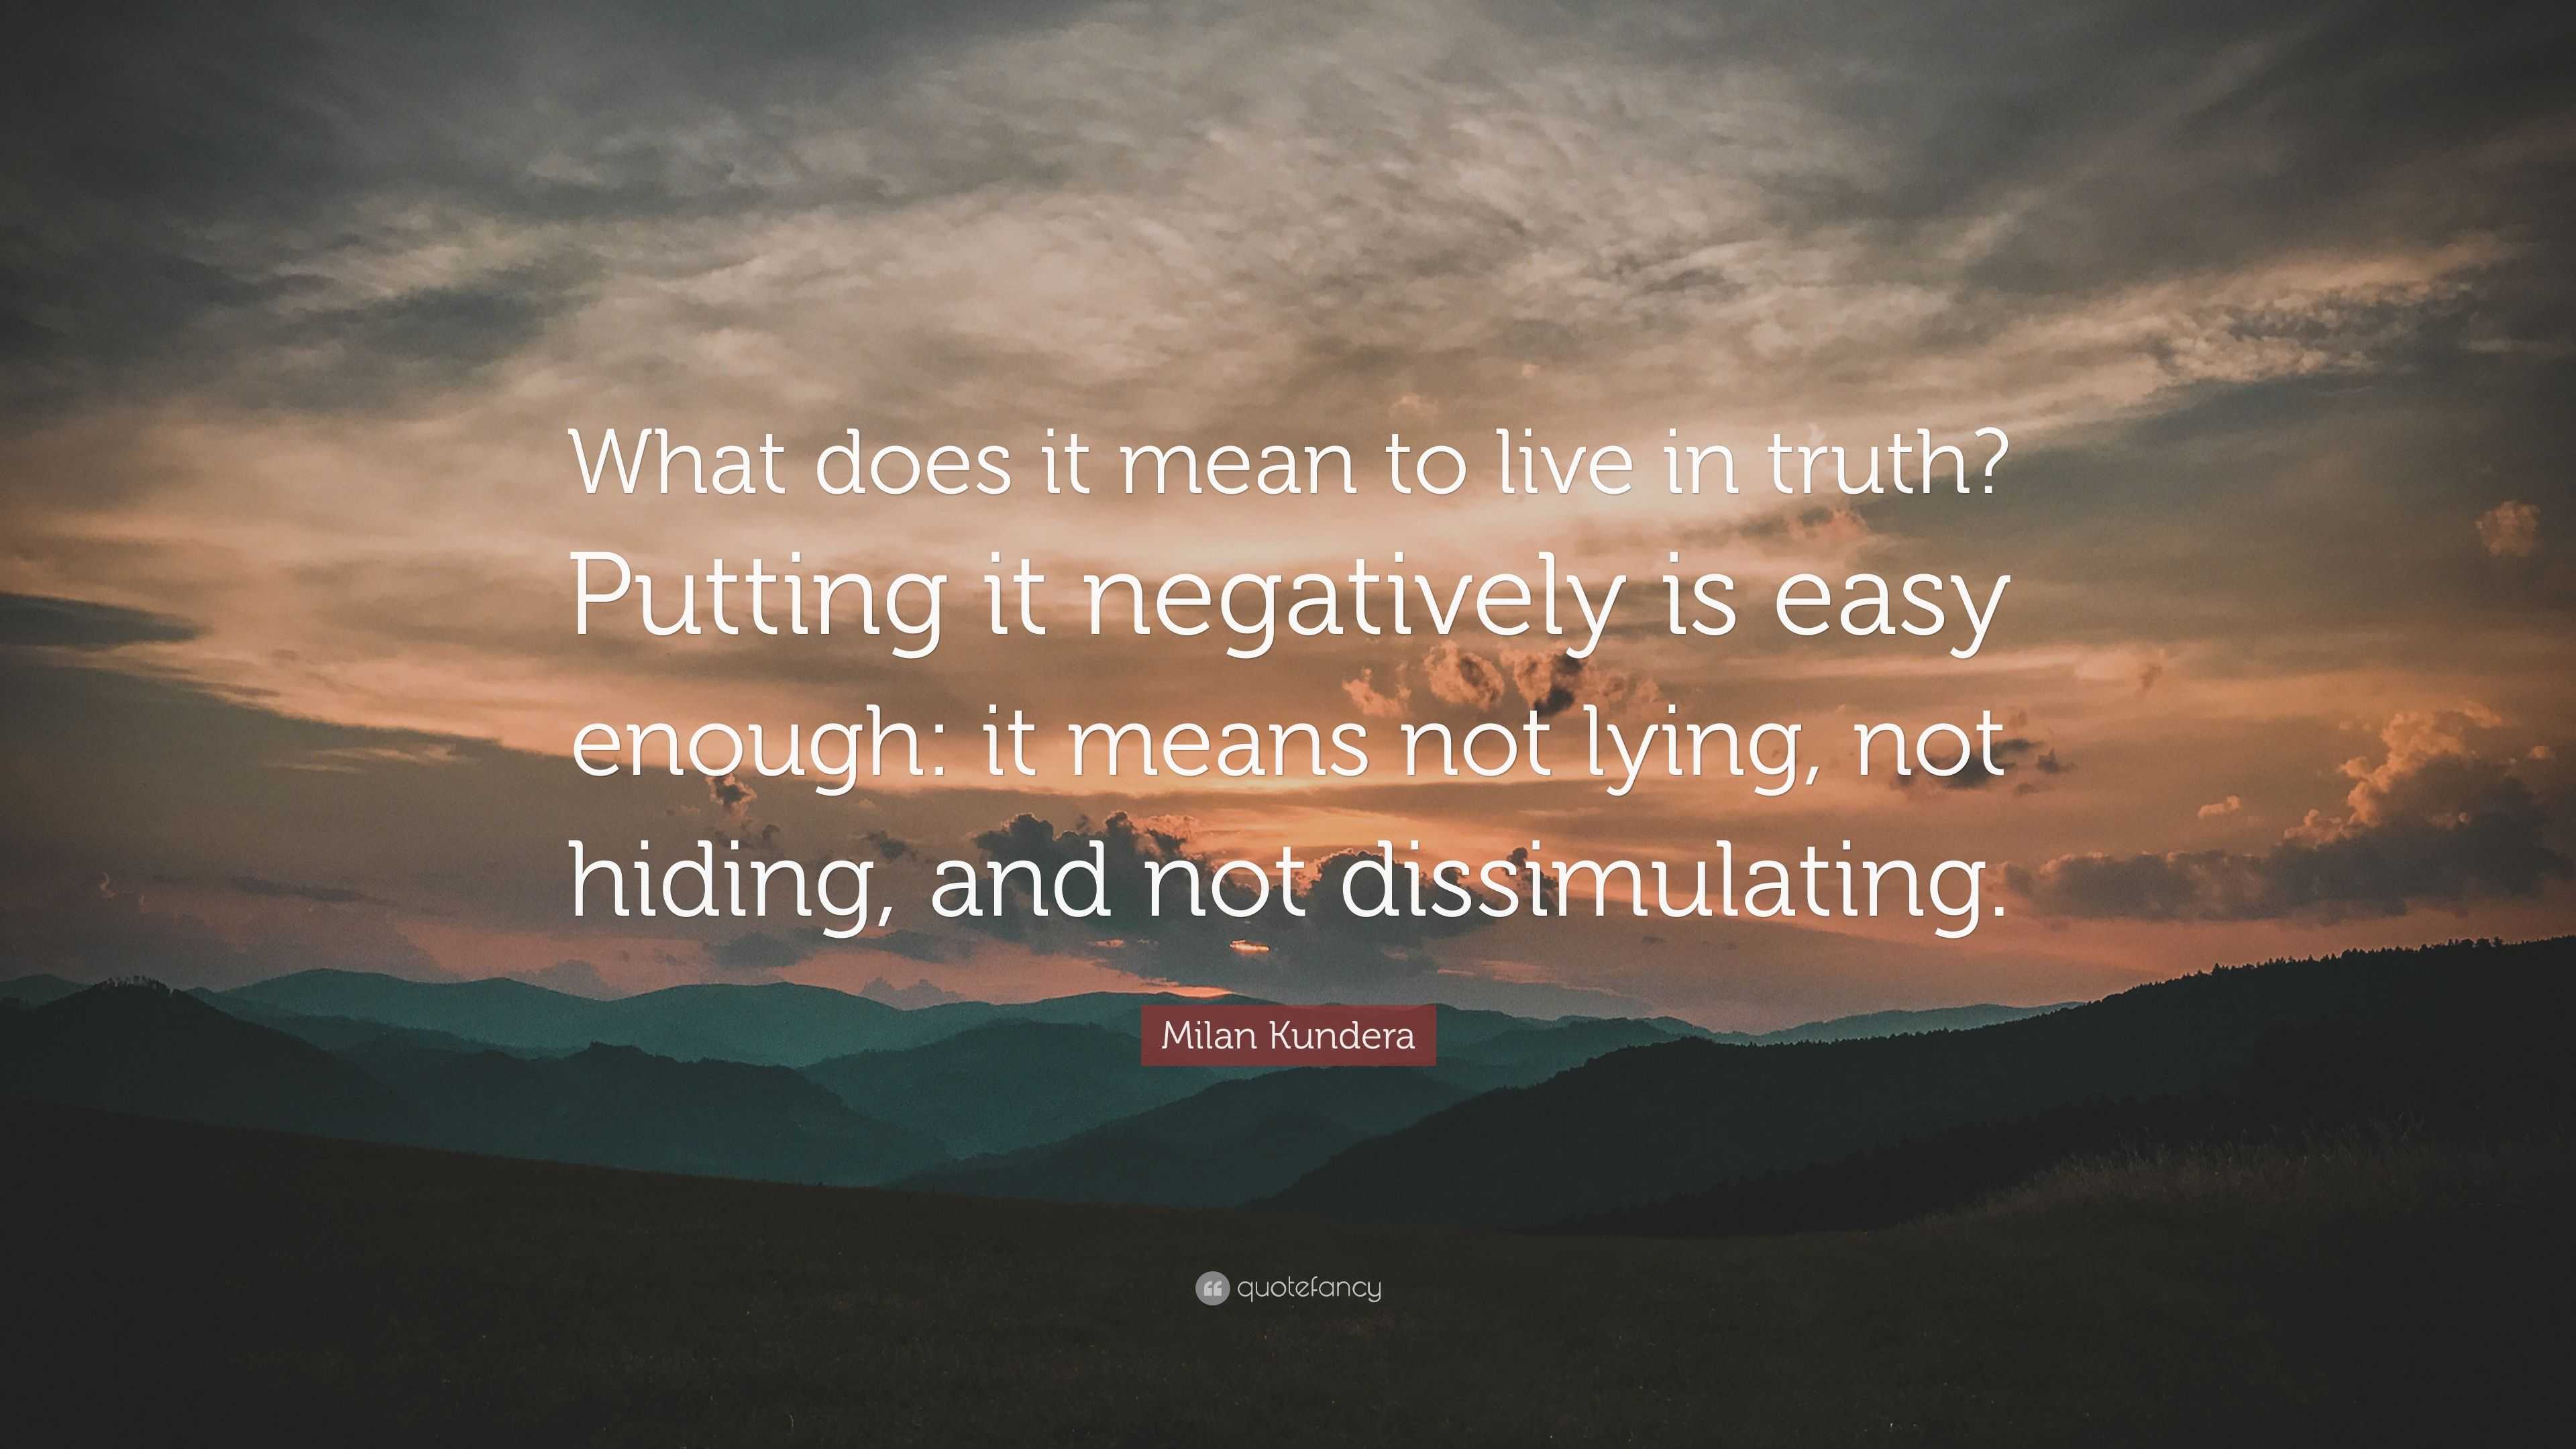 Milan Kundera Quote: “What does it mean to live in truth? Putting it  negatively is easy enough: it means not lying, not hiding, and not  dissim”